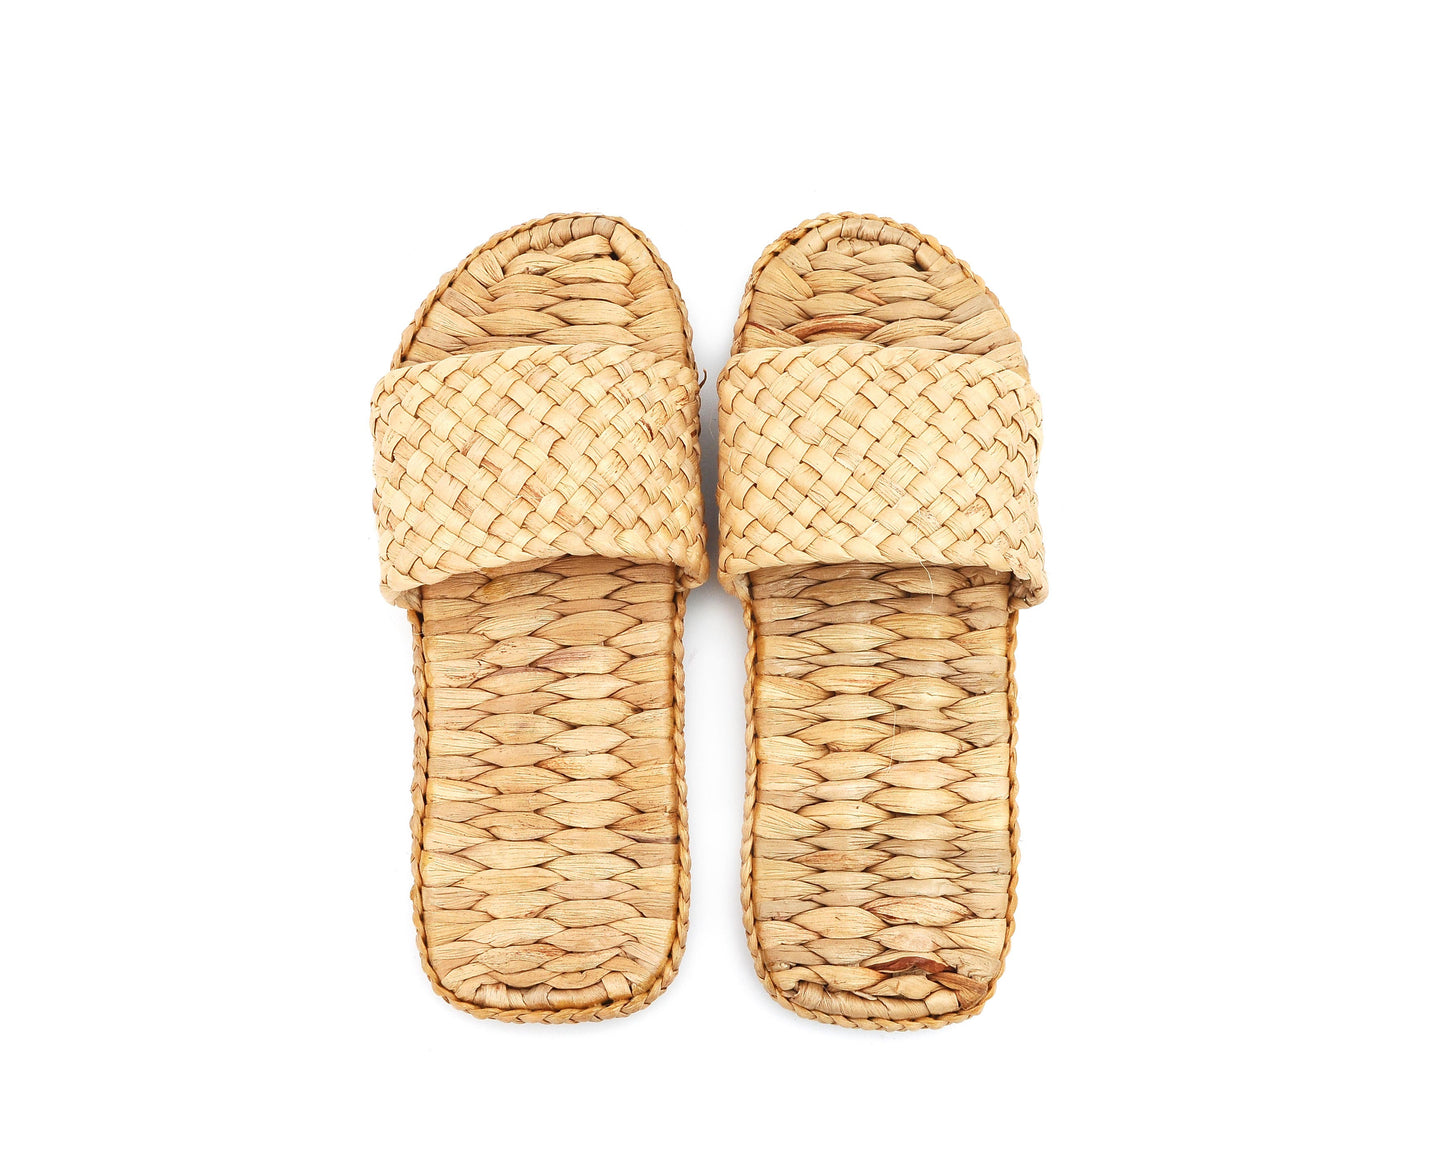 Natural Handmade - Open-Toe Scuff Slippers for Men and Ladies - Hand Woven Water Hyacinth - Crochet Style